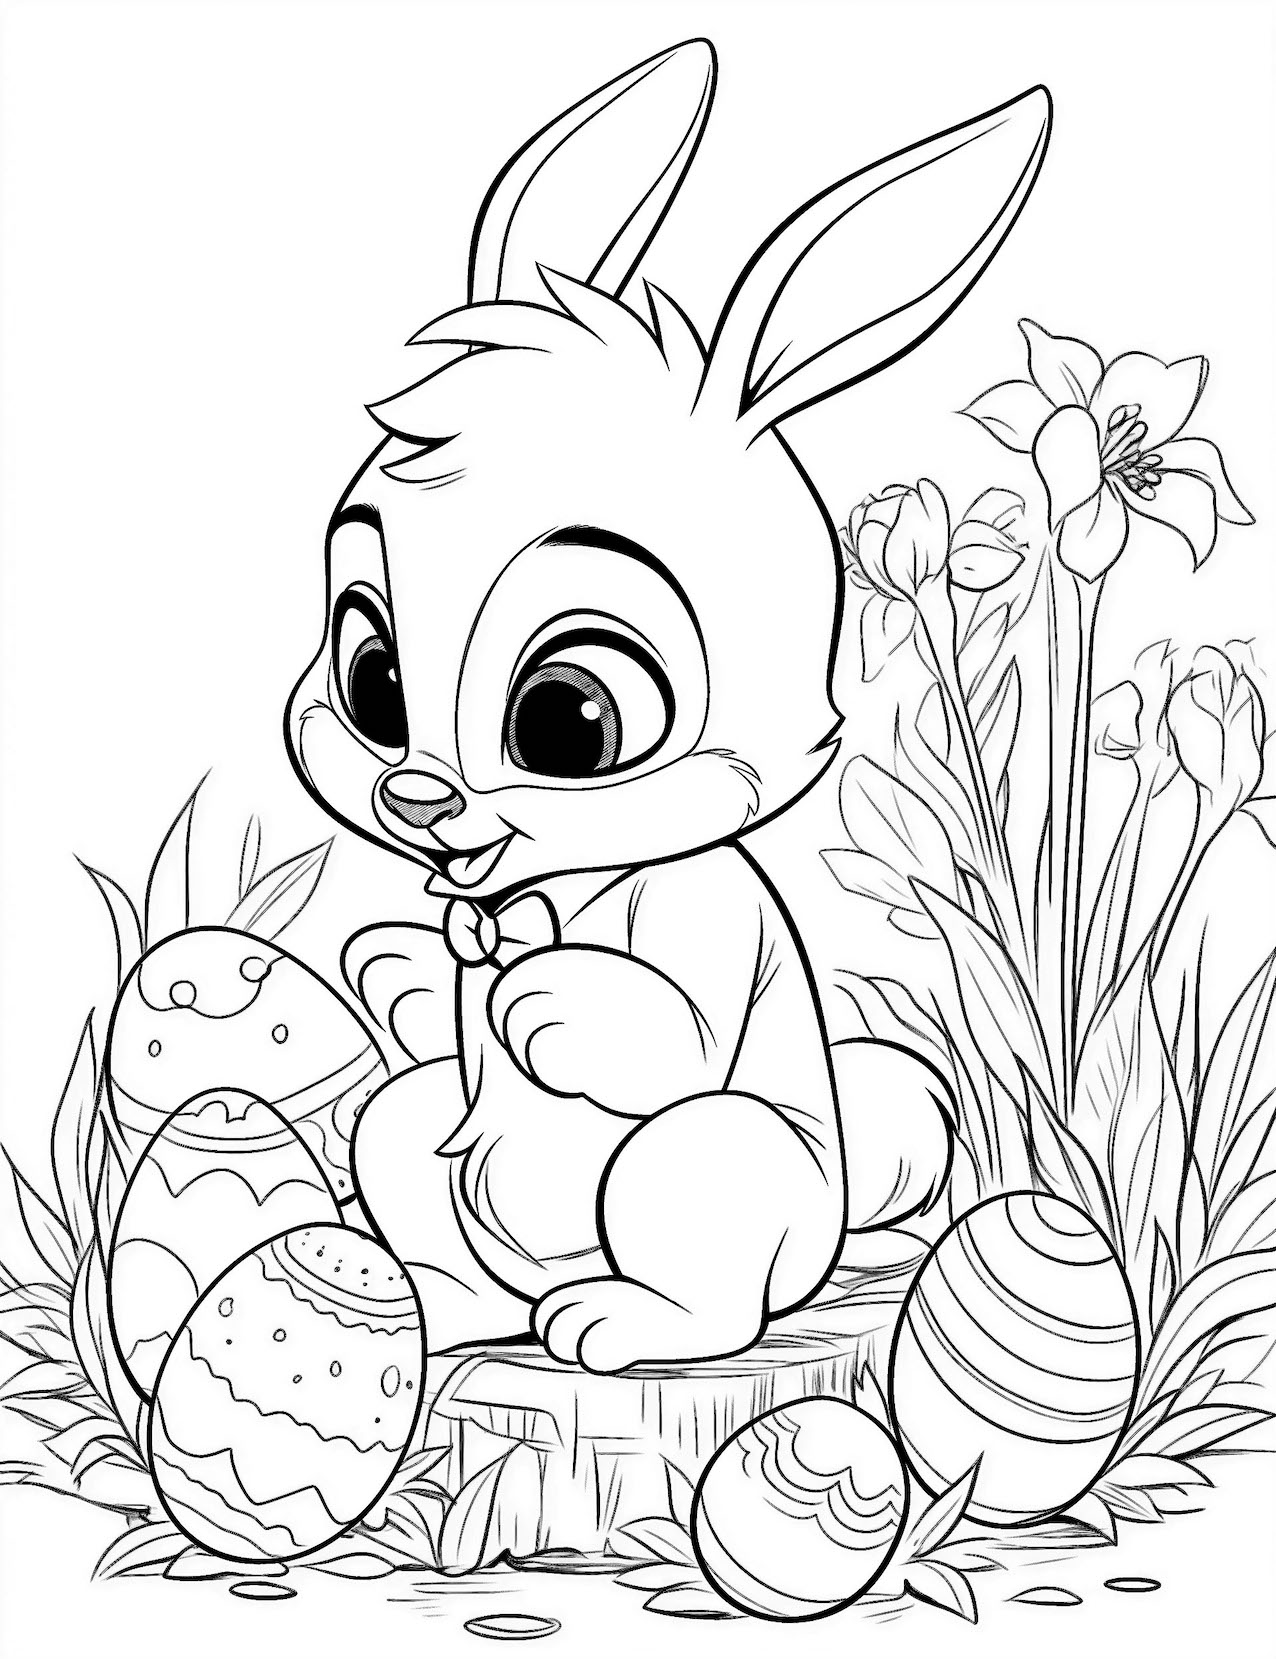 Cute bunny coloring pages for kids and adults